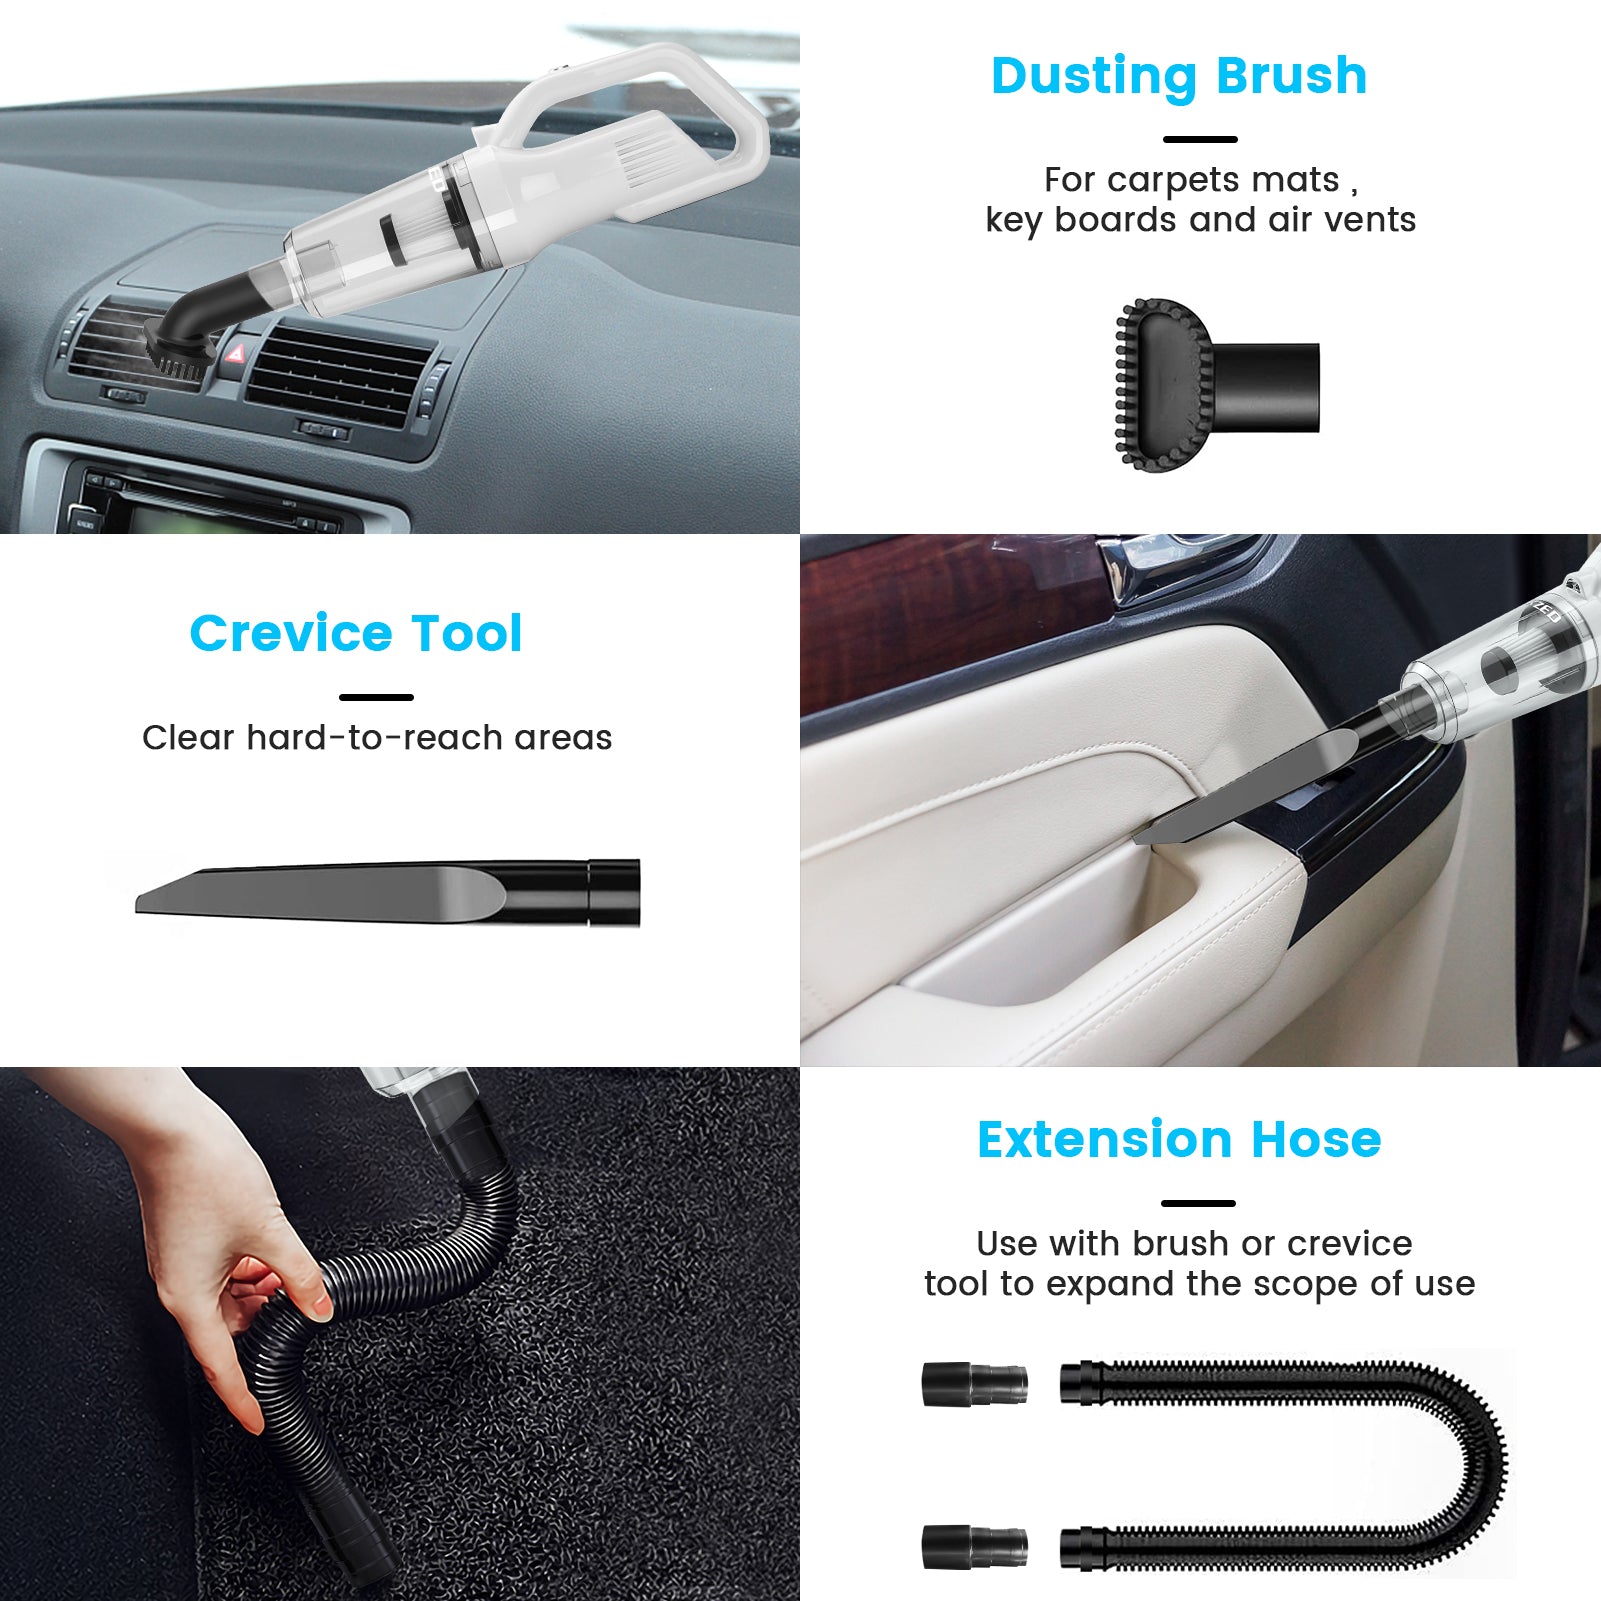 Handheld Vacuum Cordless - 9000pa Small Hand Vacuum Dust Busters Cordless Rechargeable Portable Mini Car Vacuum Cleaner, KZED Hand Held Vacuuming Cordless Wet Dry Vacuums for Pet Hair/Sofa/Stairs/Car